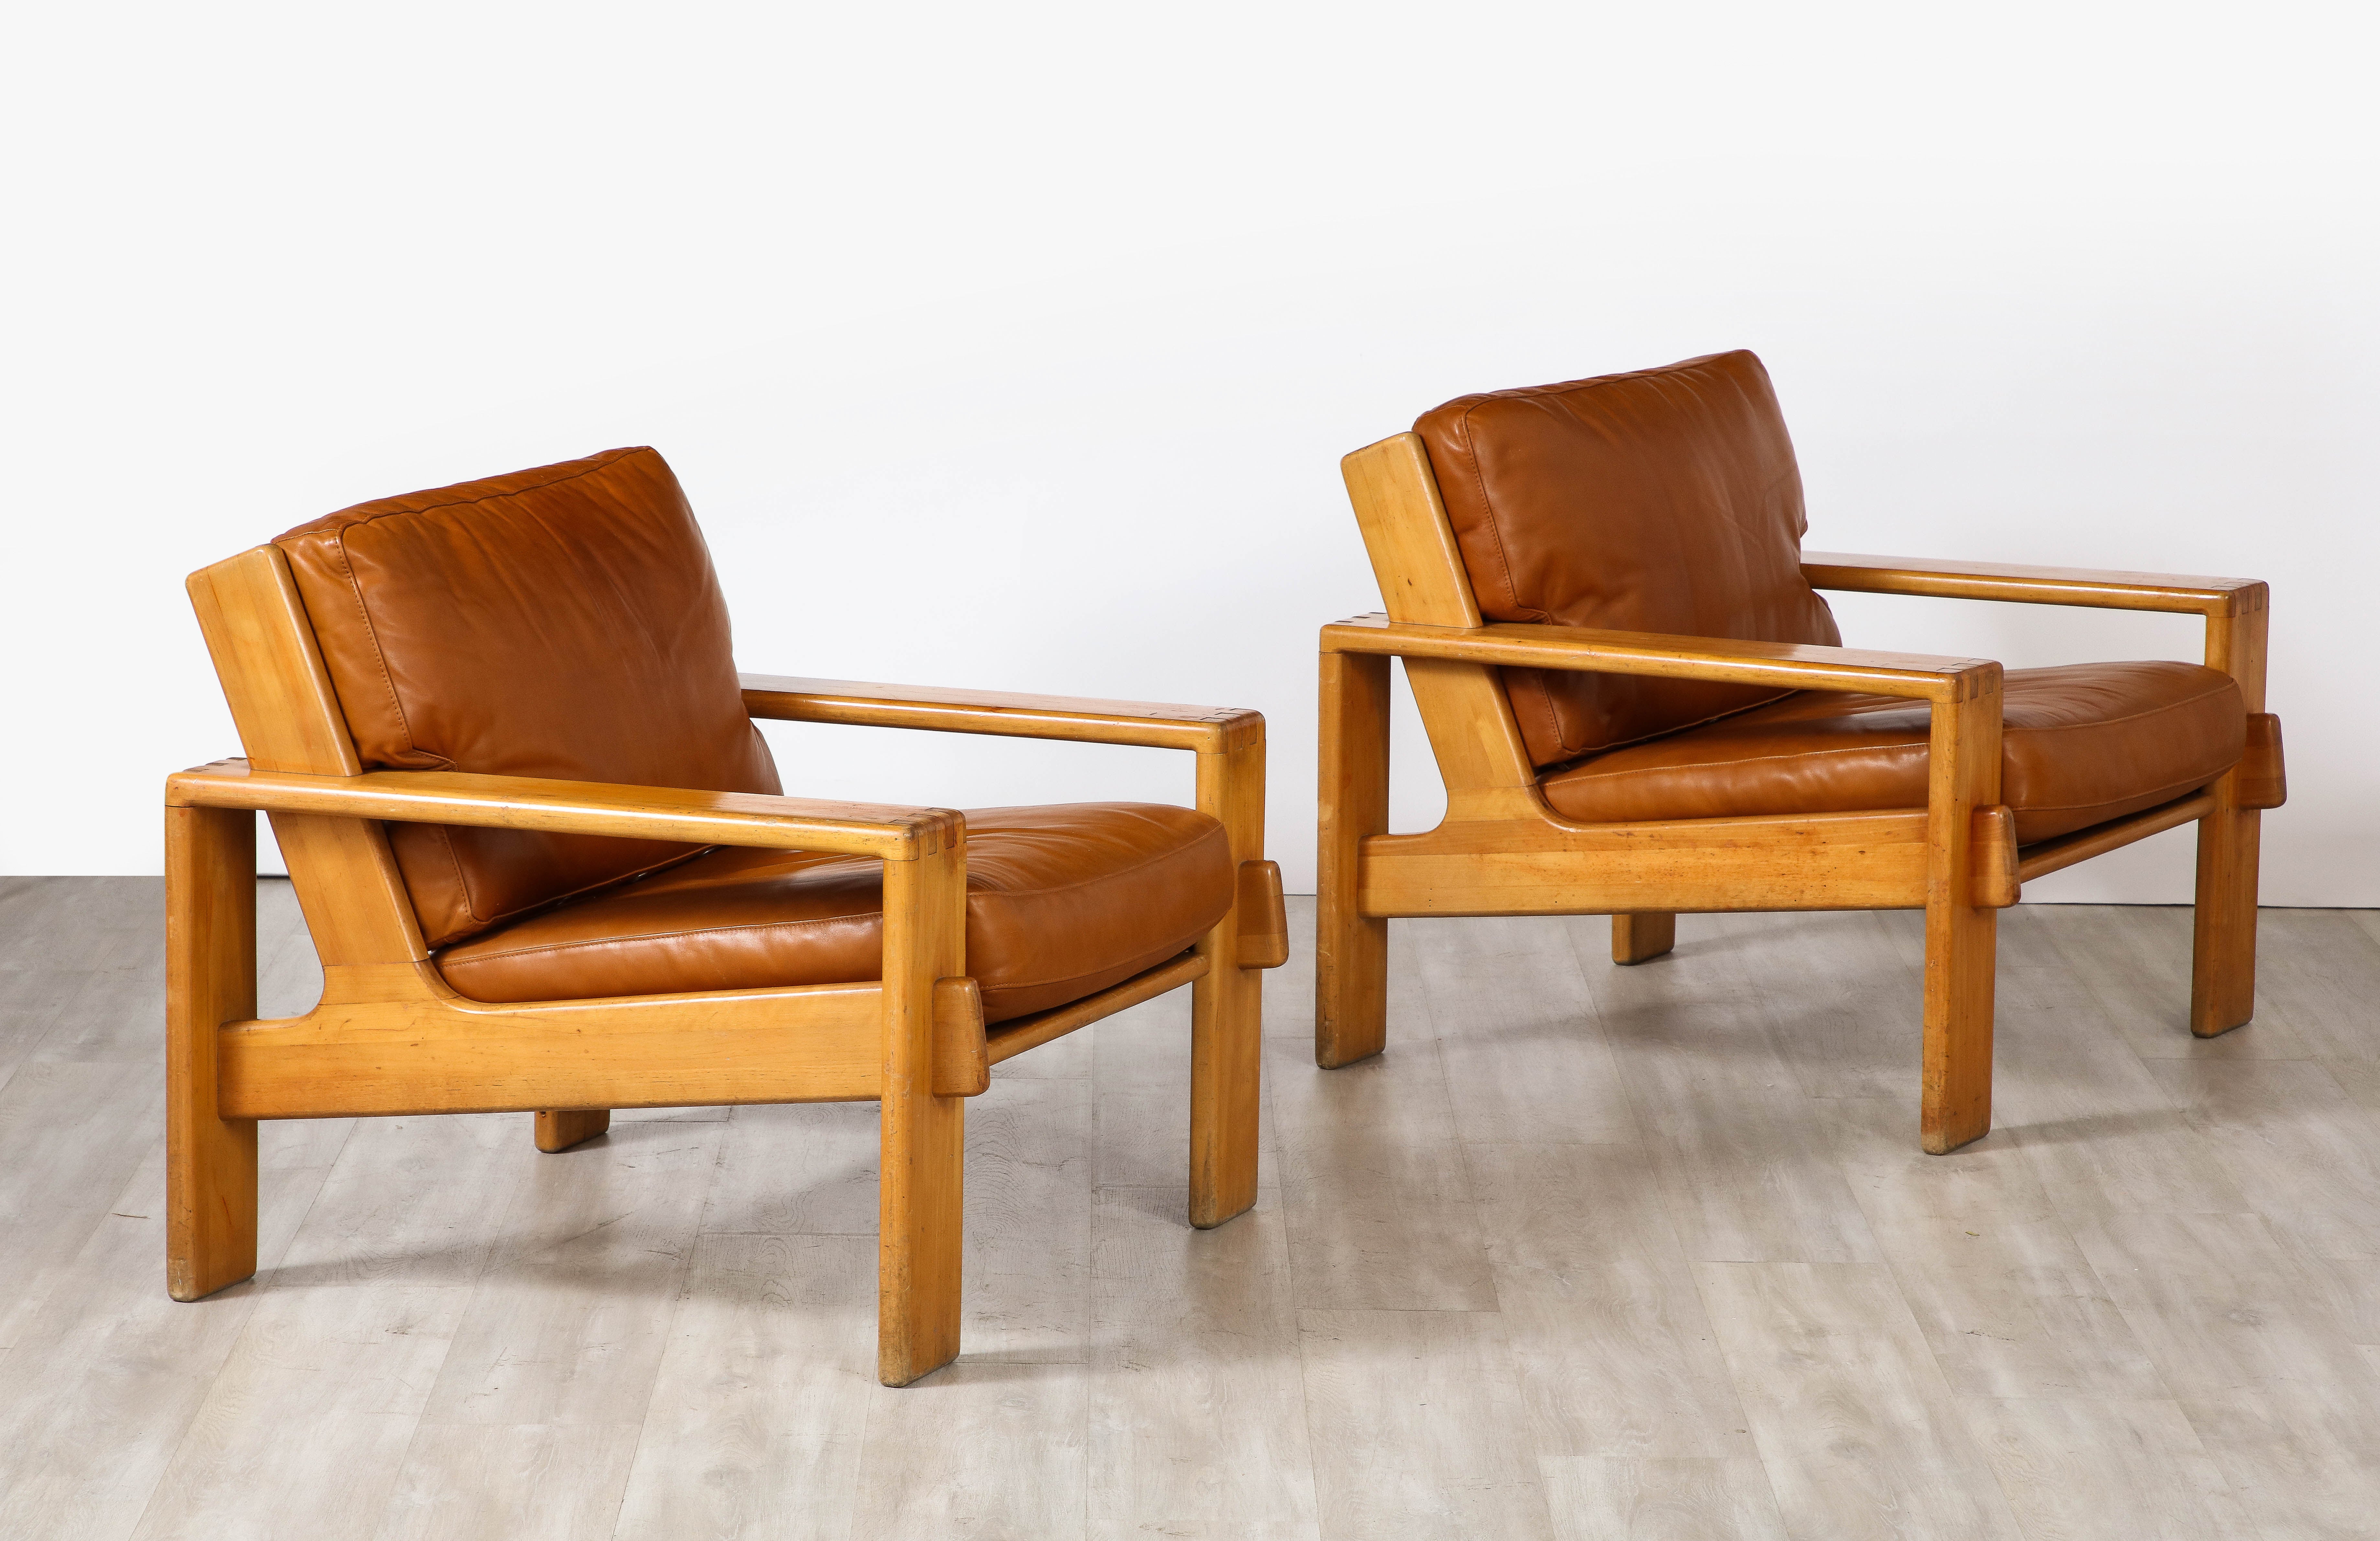 'Bonanza' pair of chairs designed by Esko Pajamies for Asko, Finland, circa 1960.
A pair of highly sculptural 1960's lounge chairs in oak with fantastic angular form. With horizontal wood slat backs, wide arm rests, seats and backs; the seats and